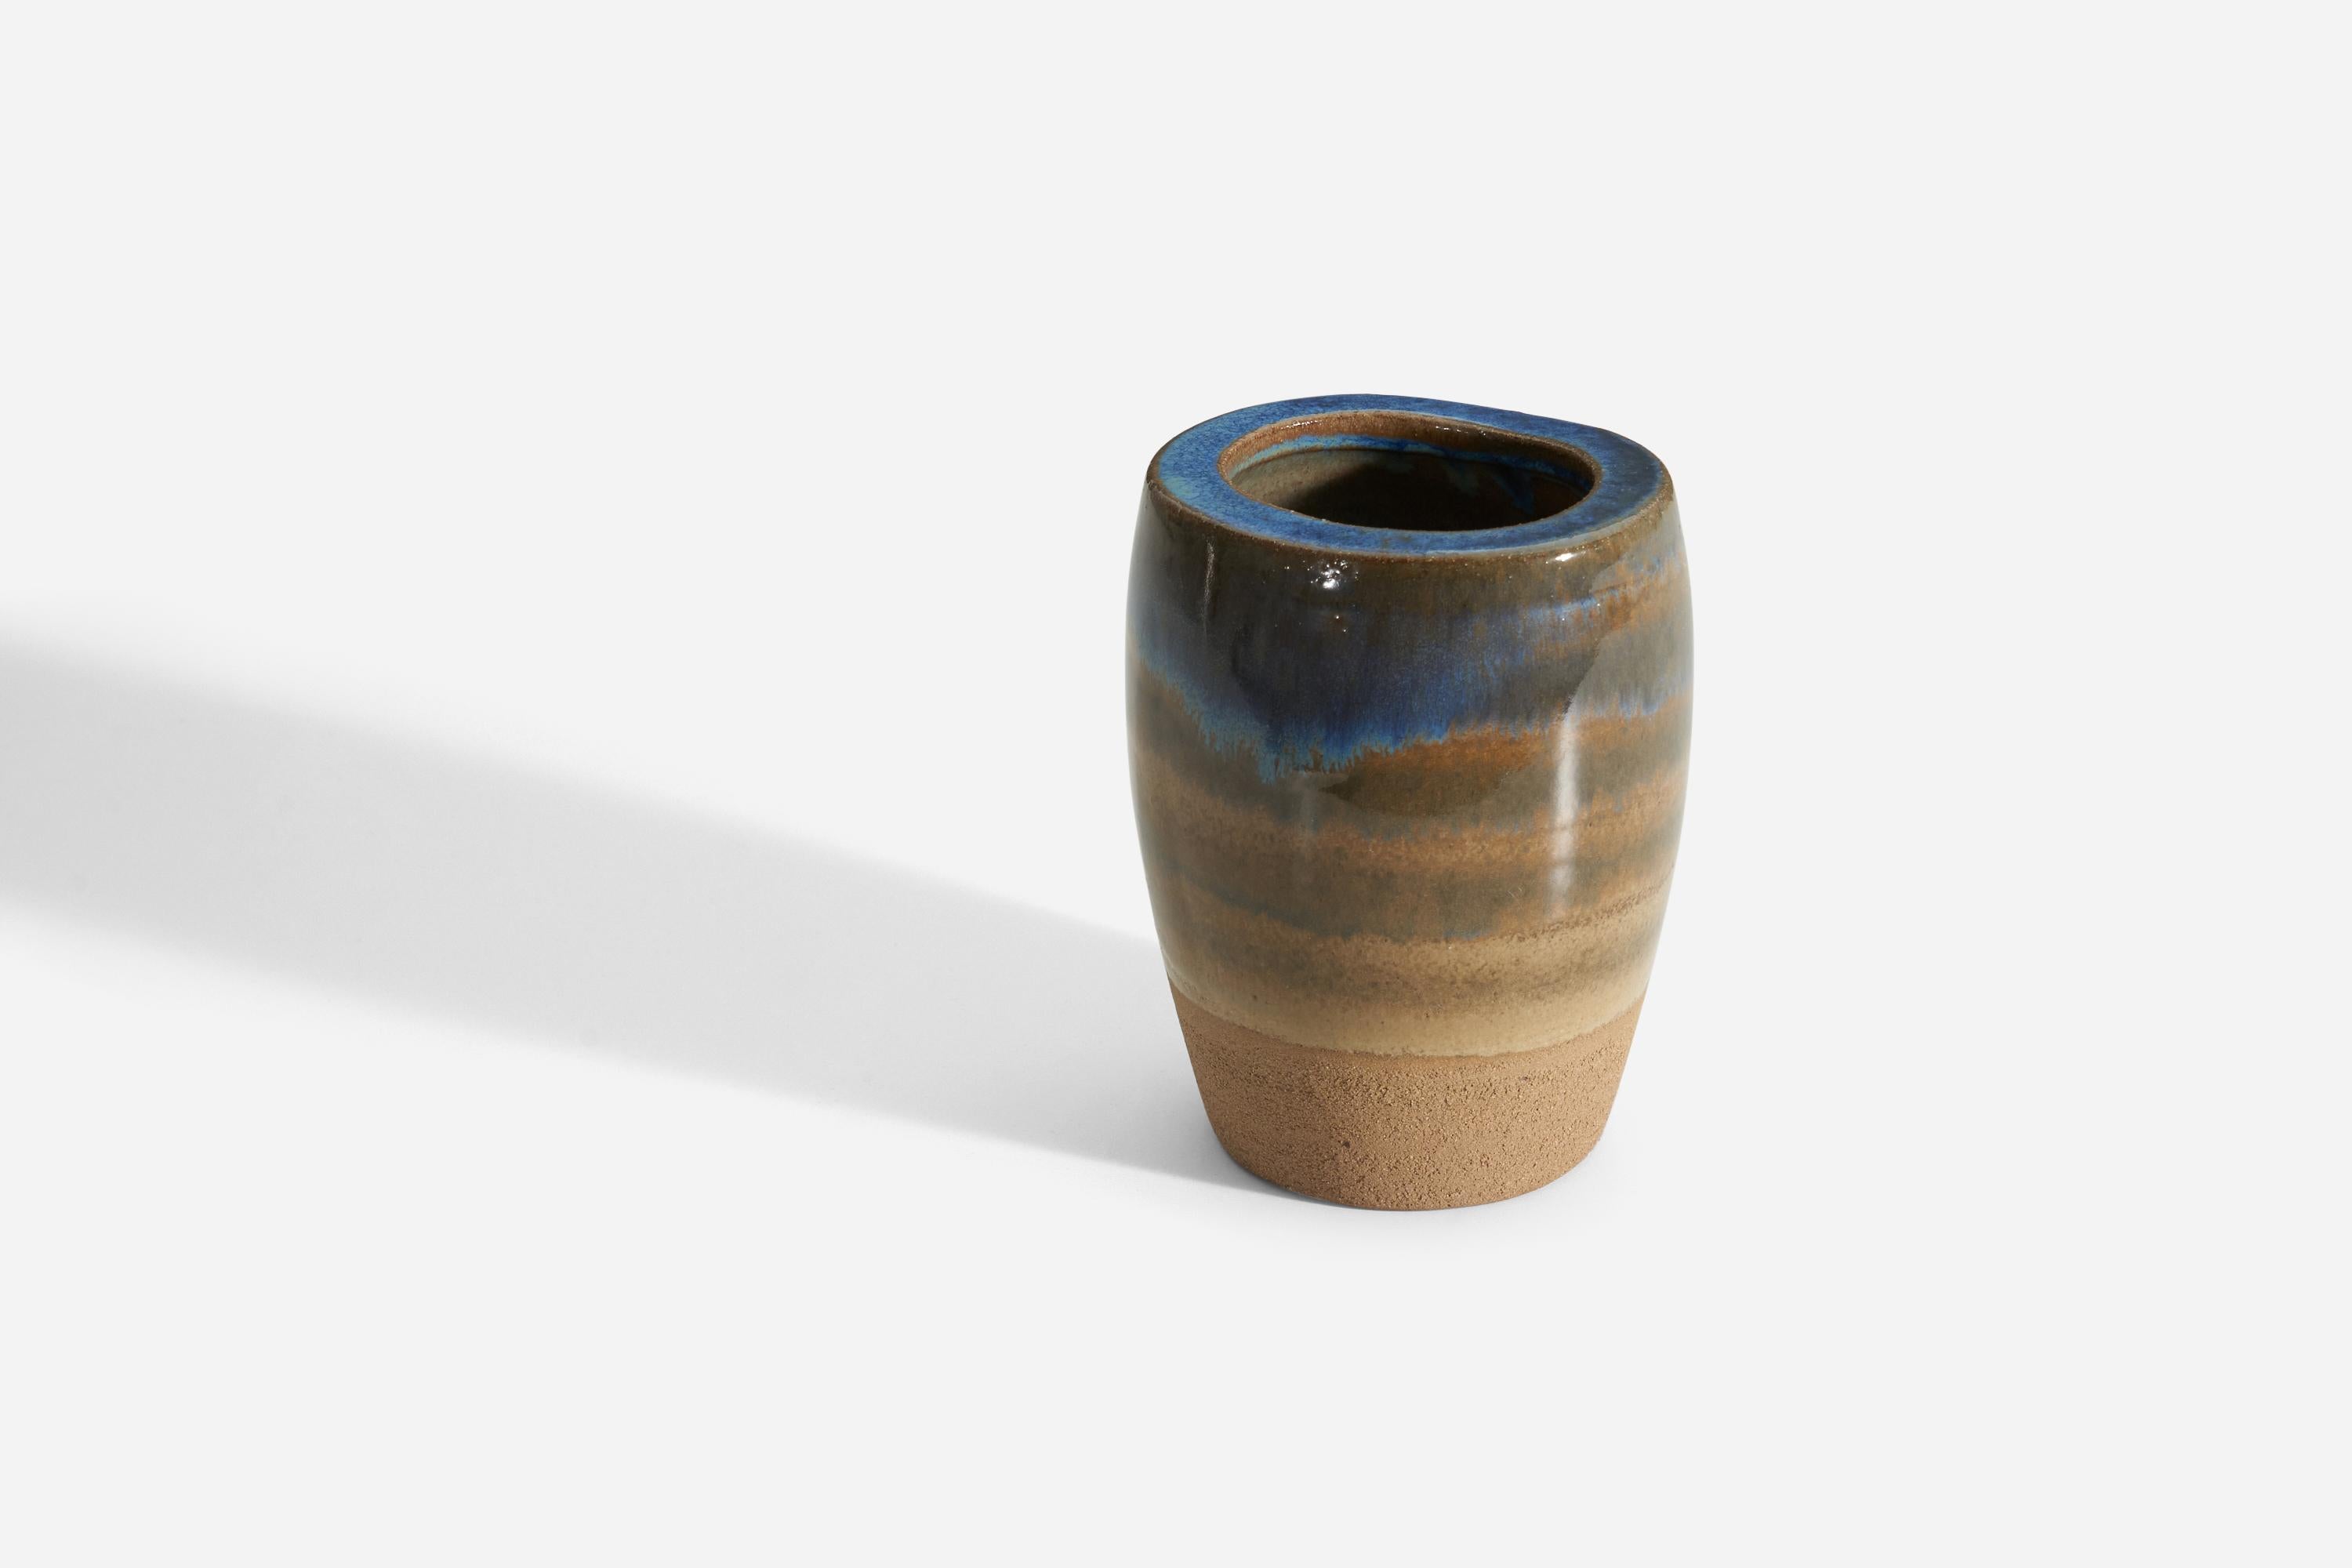 A glazed stoneware vase produced by Michael Andersen Keramik. Maker's mark on the underside of the piece. 

